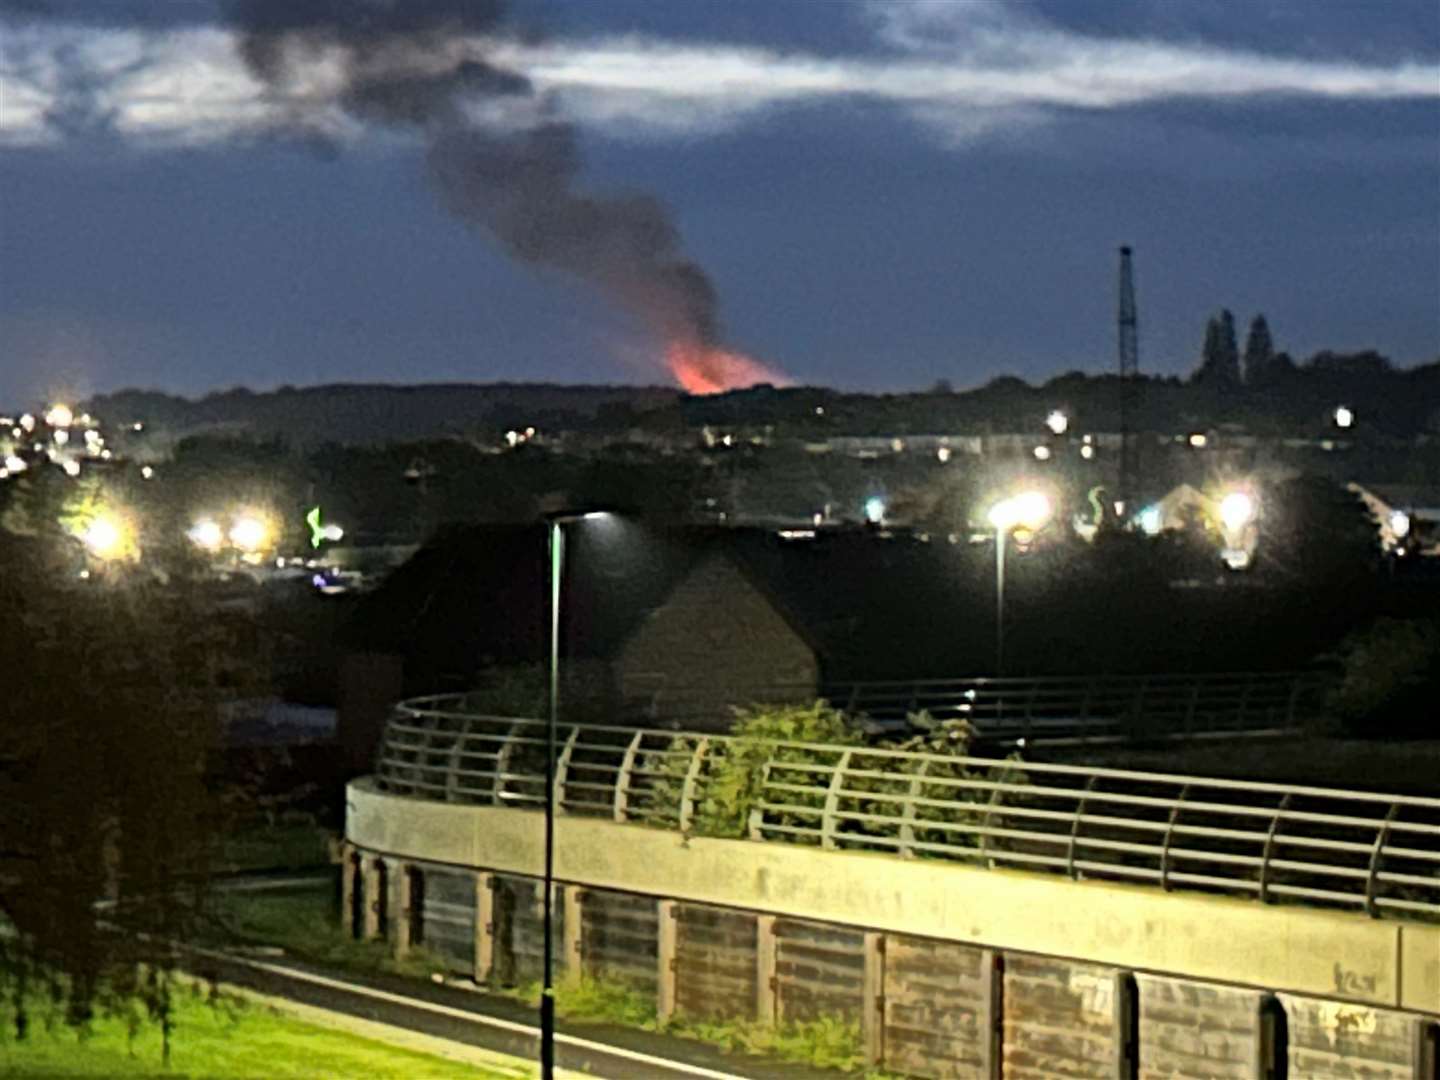 A lorry fire has shut the M2 in both directions near Rochester. The glow from the blaze can be seen from the Rochester bridge. Picture: Rick Wingate